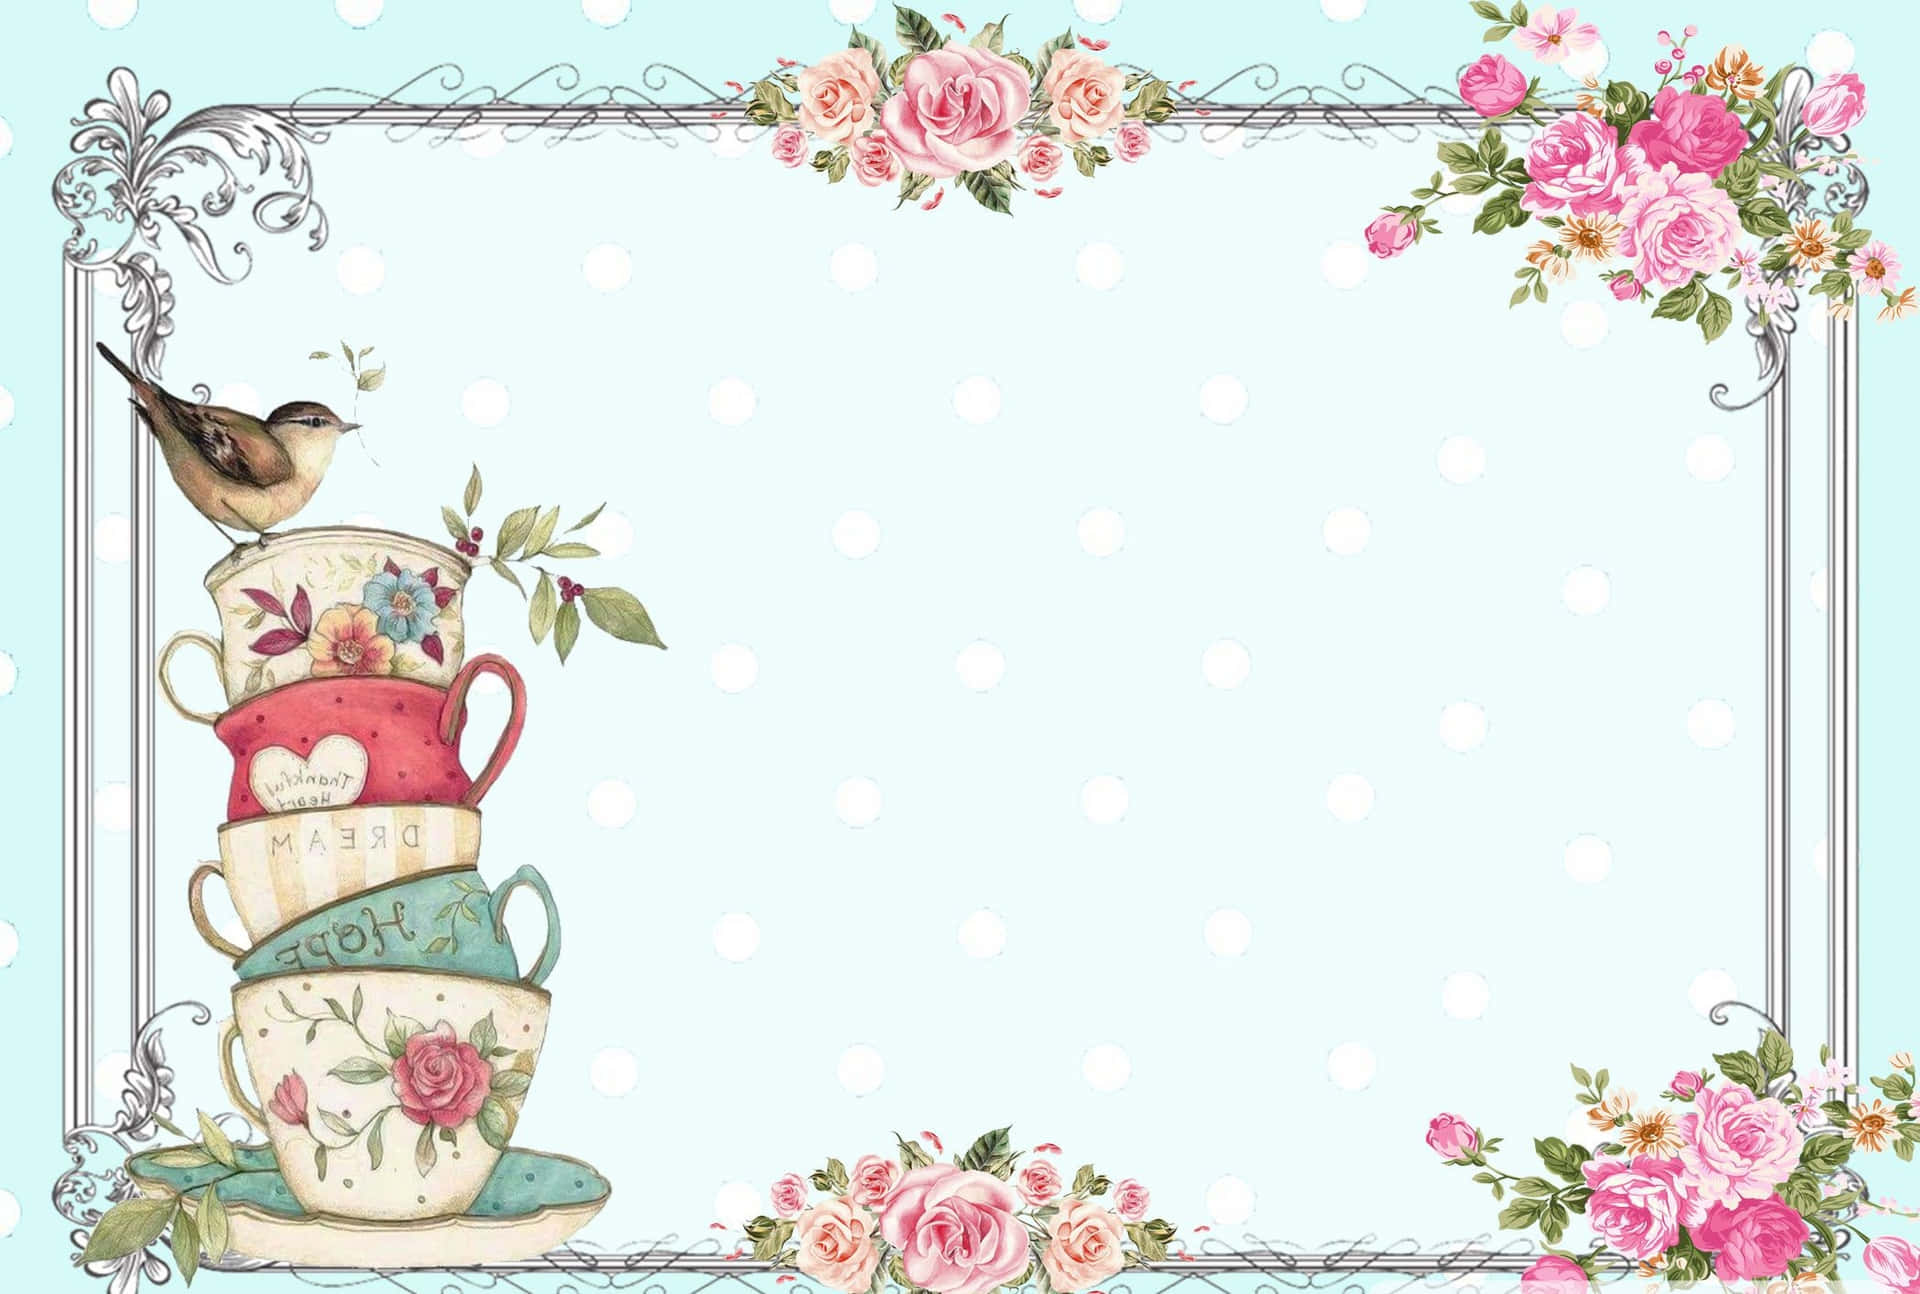 A Teacup Frame With Flowers And Birds